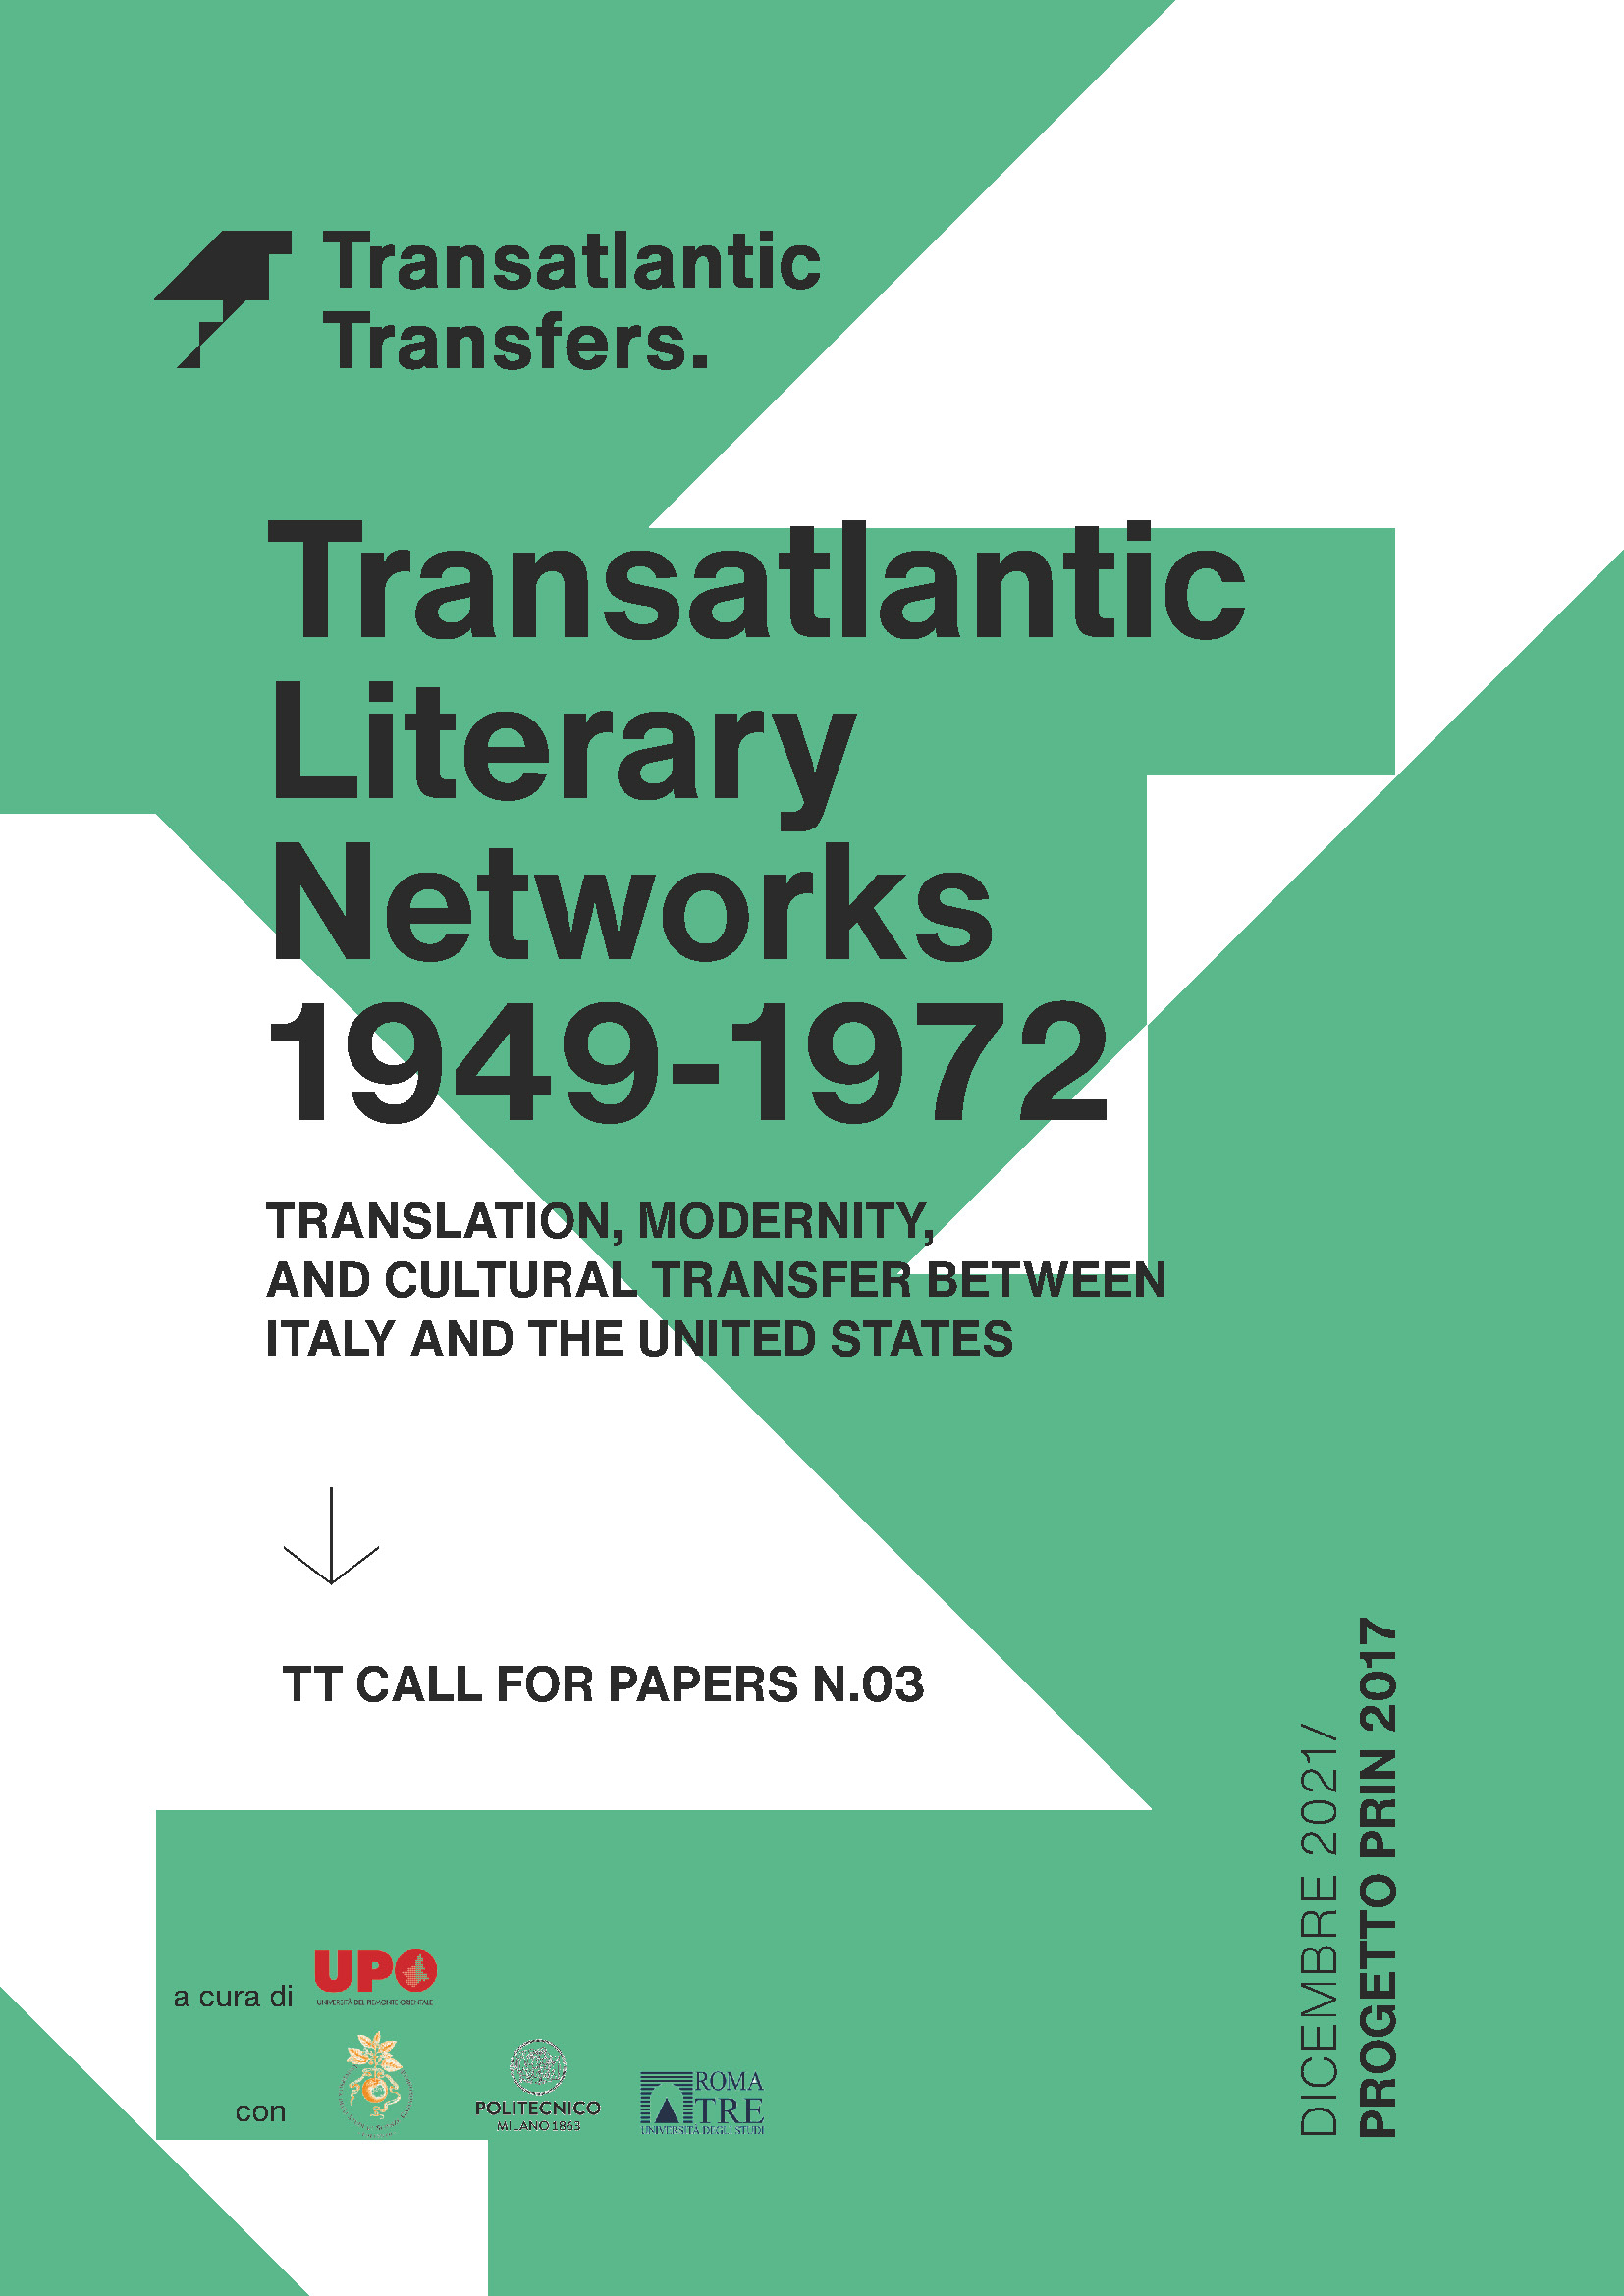 Transatlantic literary networks 1949-1972. Translation, modernity, and cultural transfer between Italy and the United States